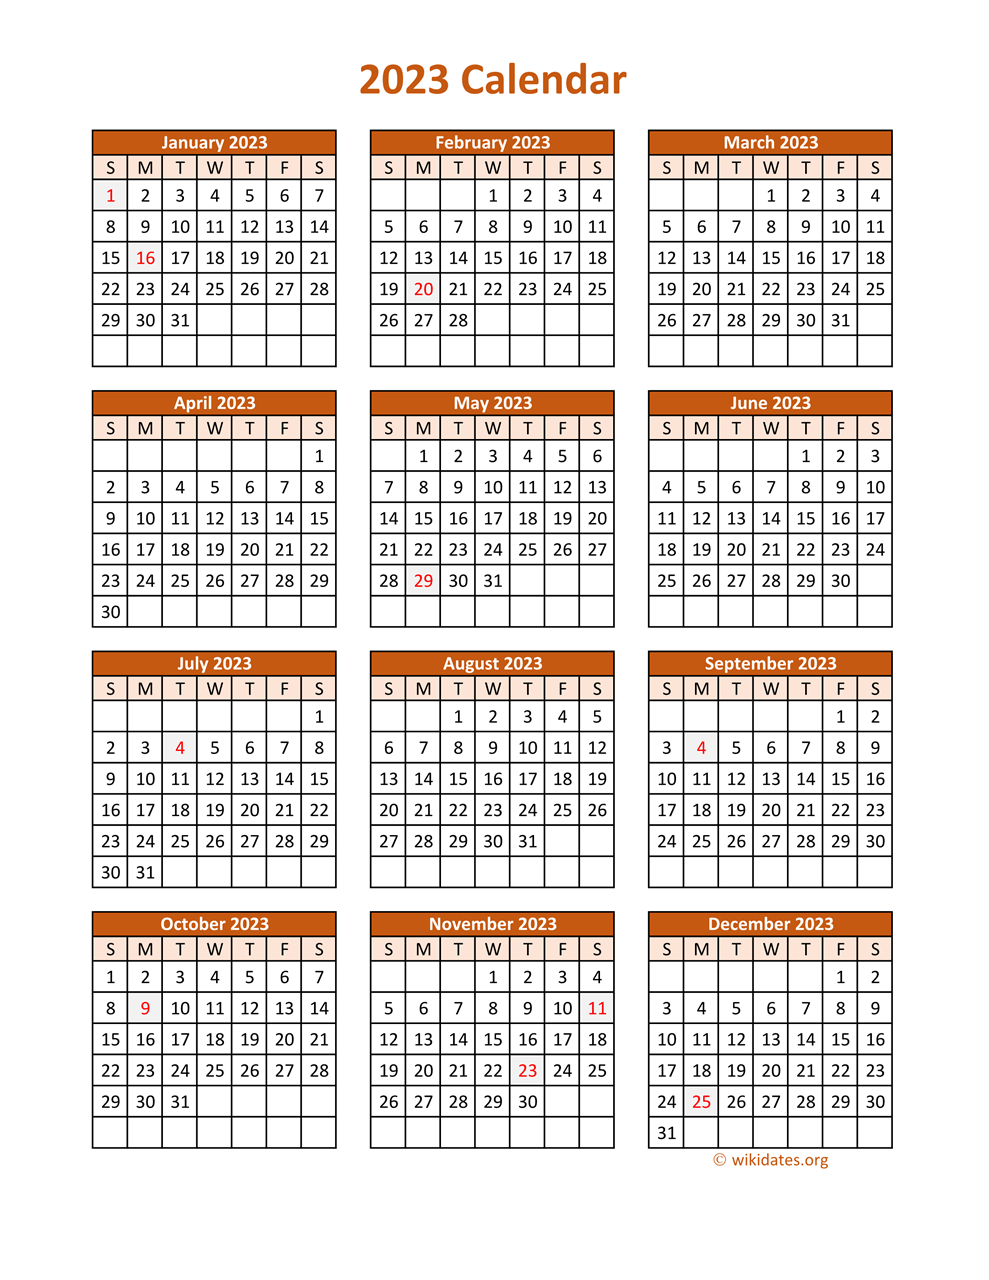 Full Year 2023 Calendar on one page | WikiDates.org